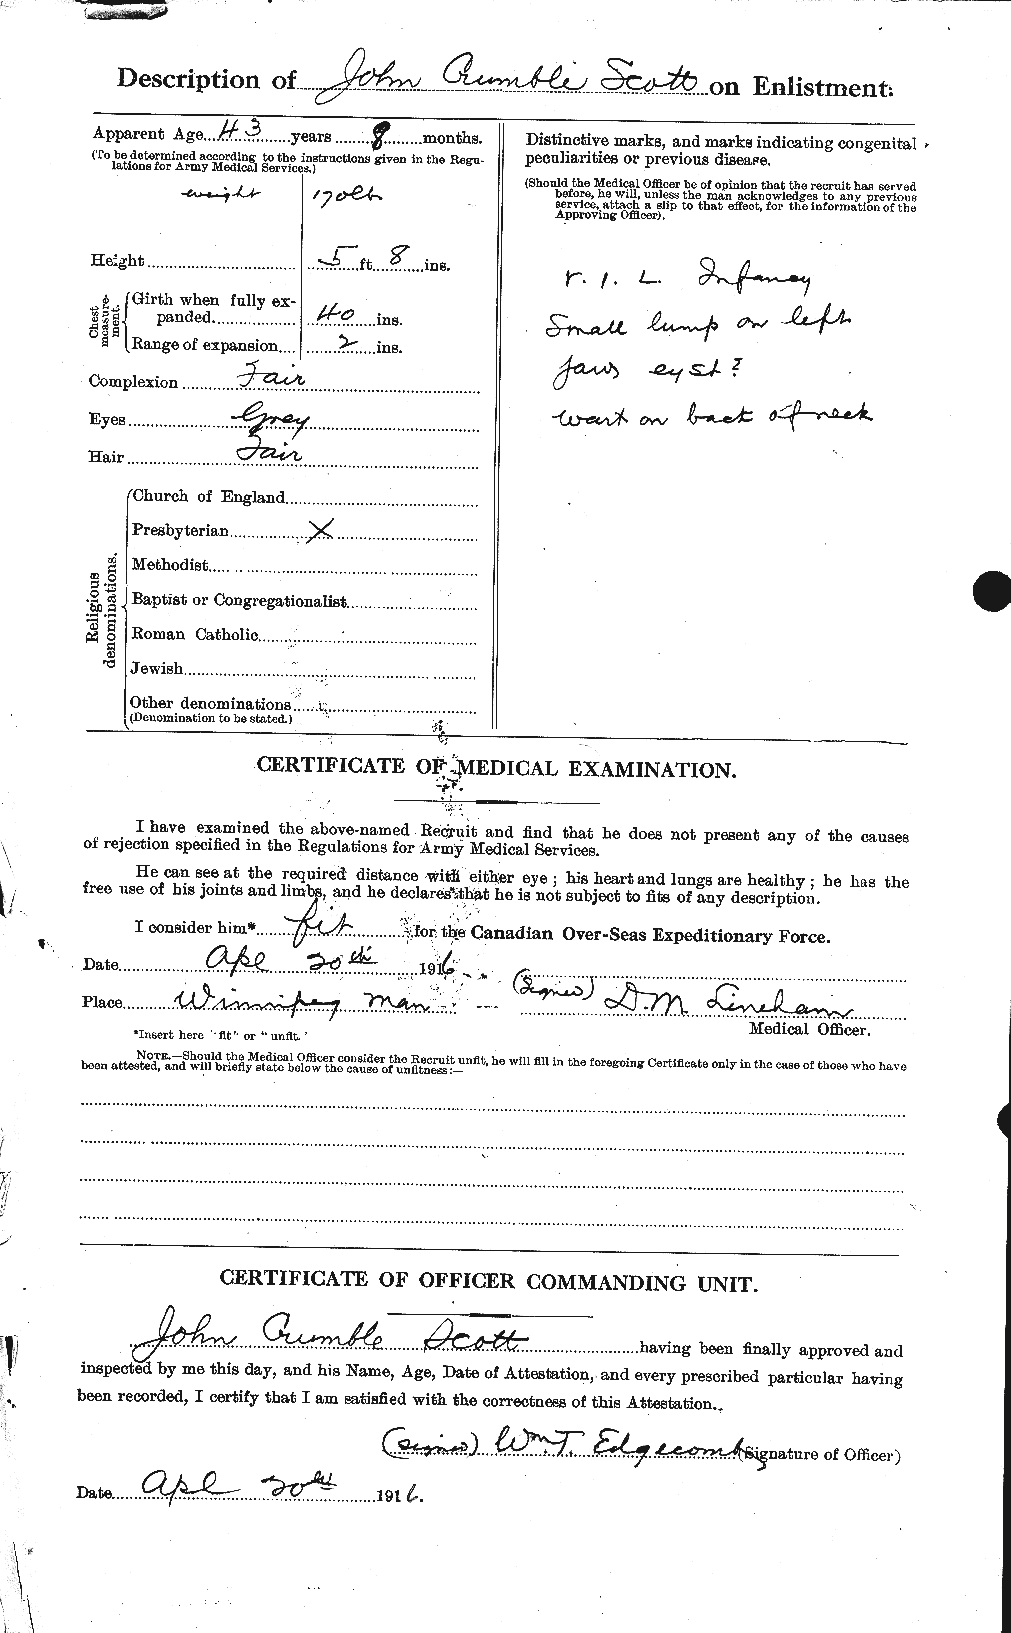 Personnel Records of the First World War - CEF 084646b